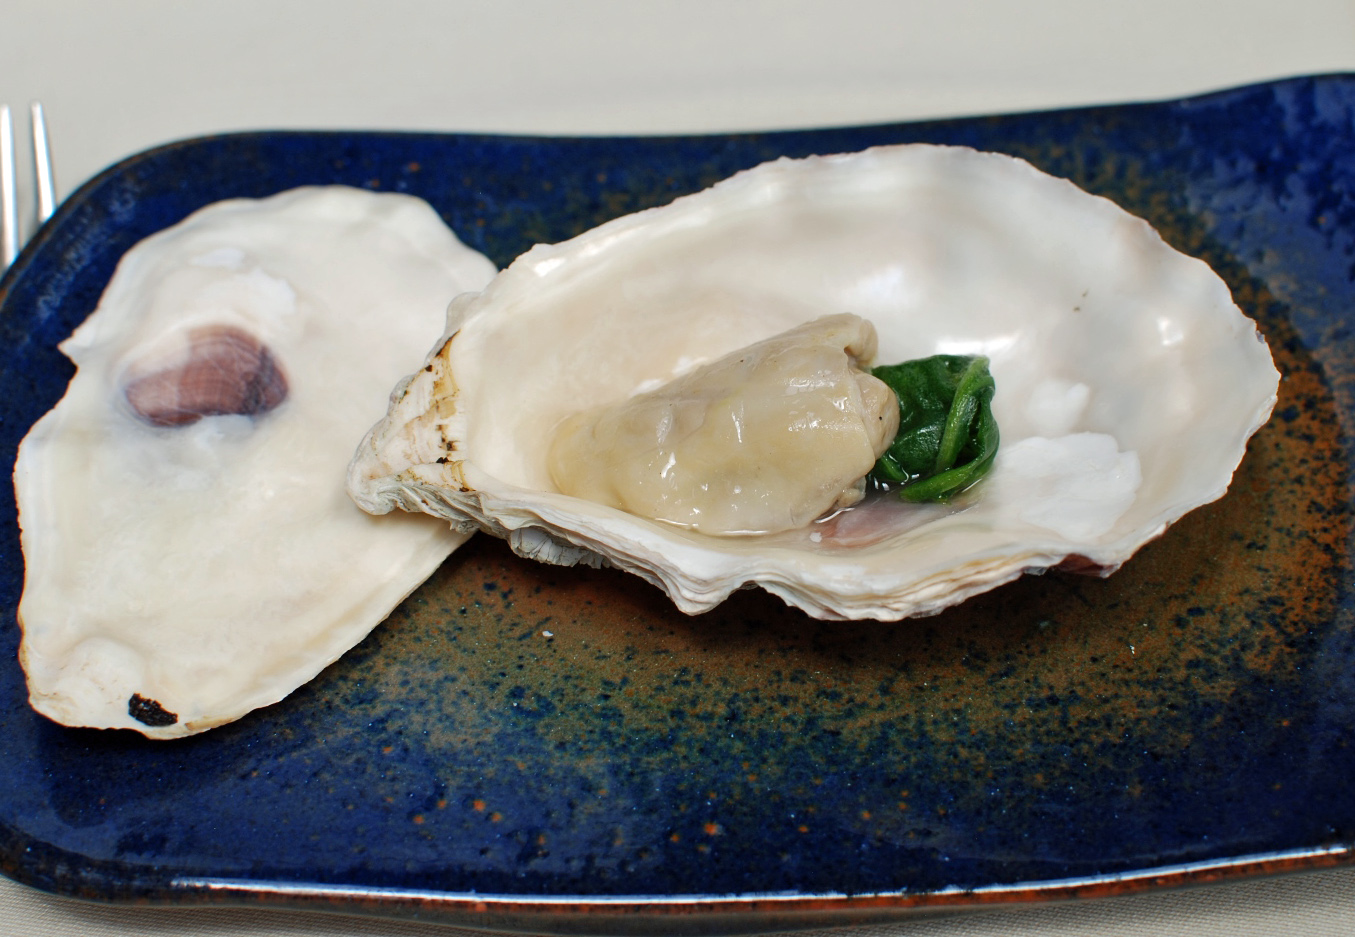 Oyster and spinach at Asador Etxebarri | NY Food Journal